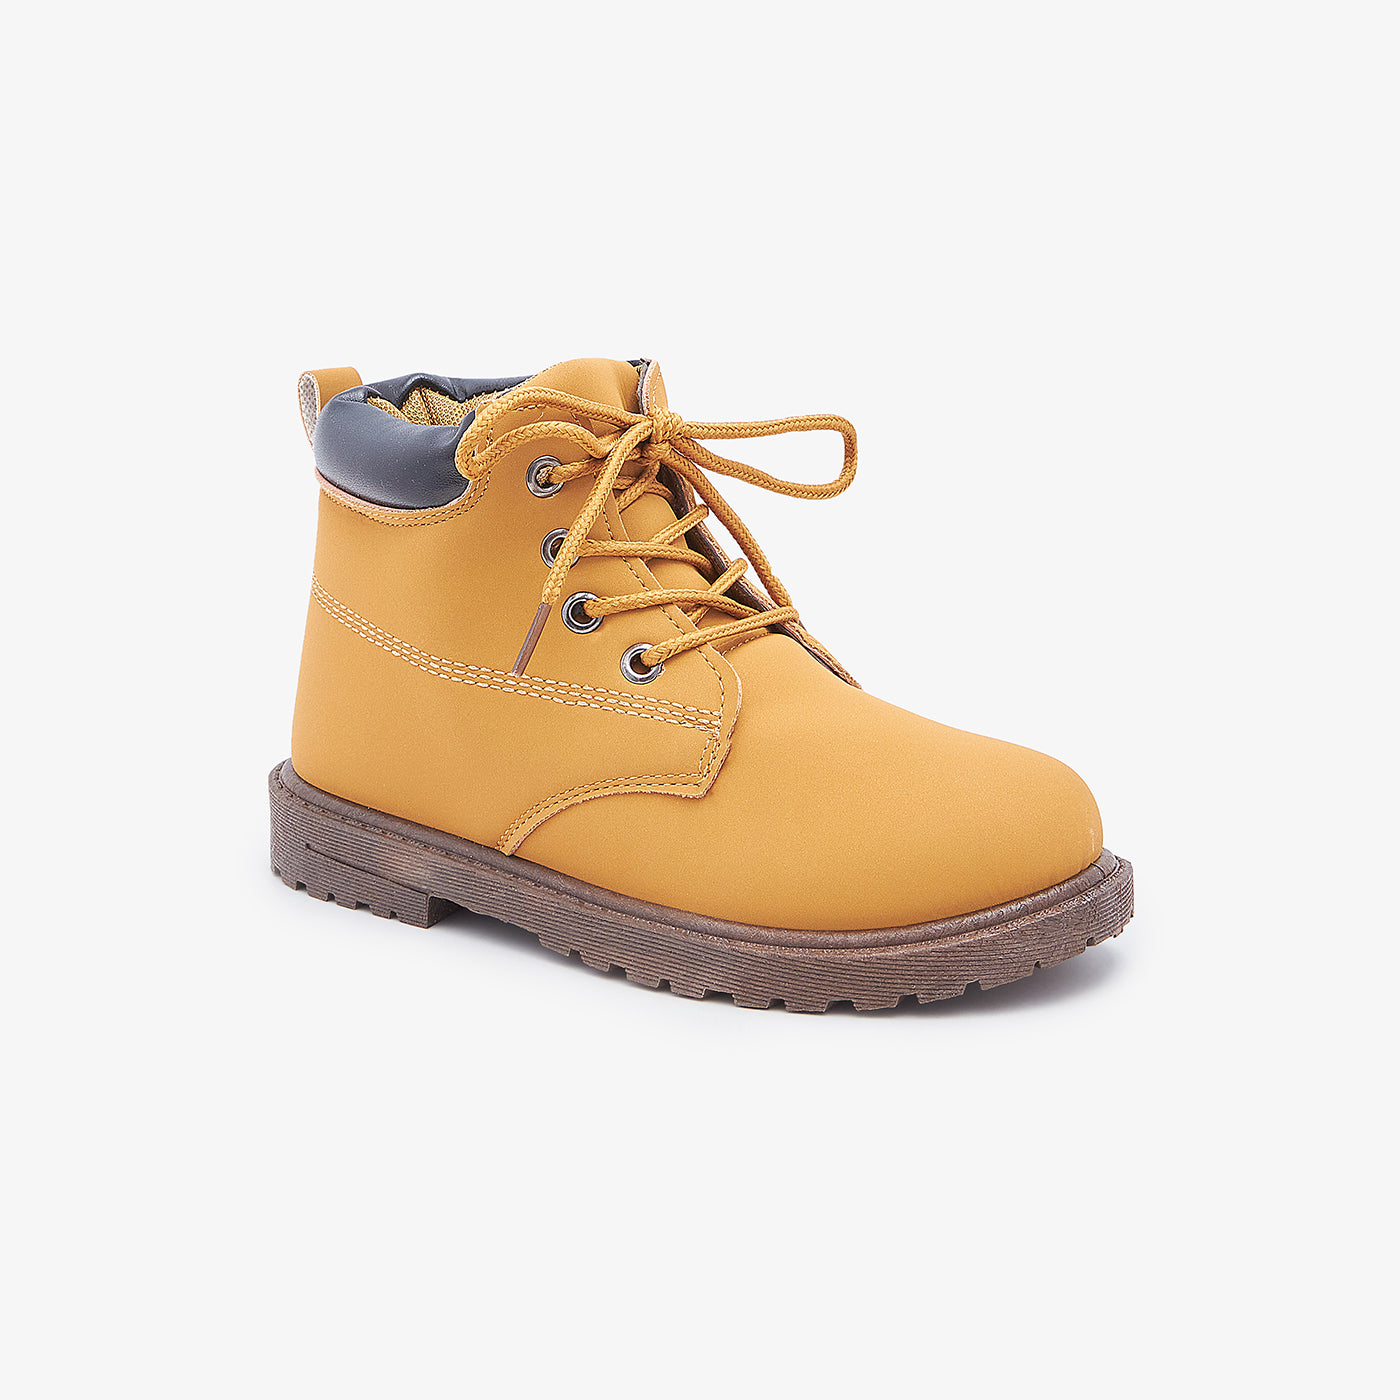 Ndure Boys Ankle Boots